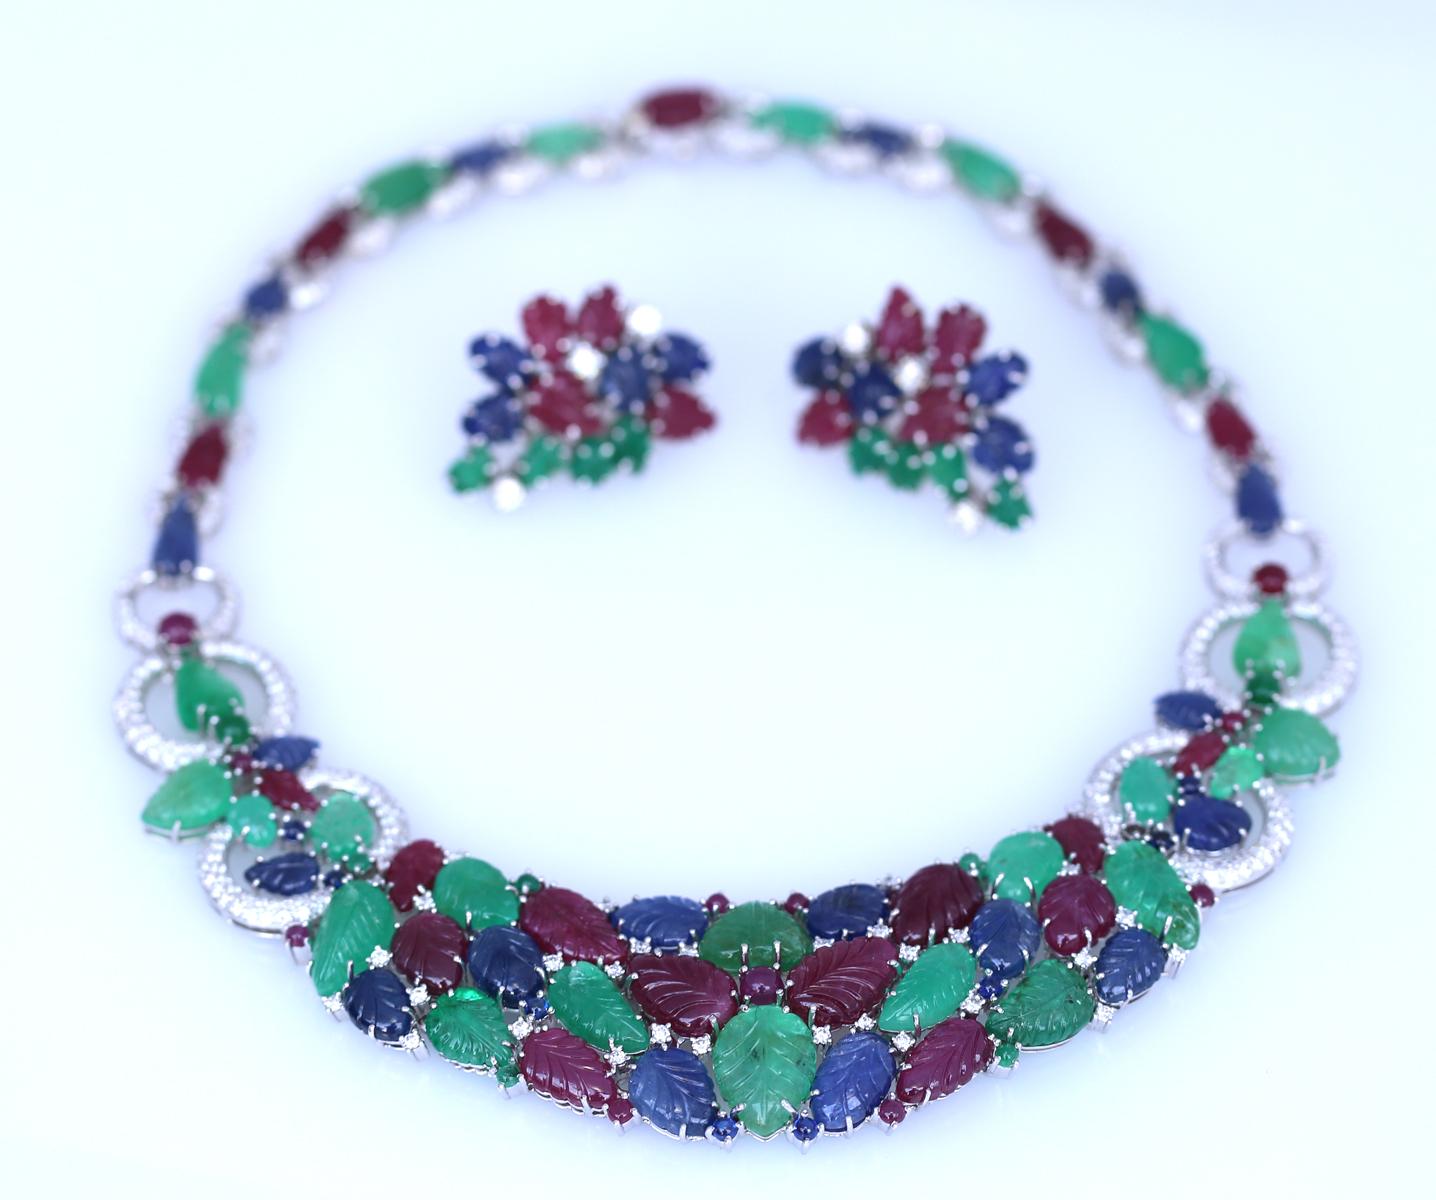 Carved Emeralds, Sapphires & Rubies with a round cut fine Diamonds. Necklace and earrings set. 18 Karats White Gold.
It is a Tutti Frutti design and style executed to a highest standards and finished with exquisite details. It has magical mix of